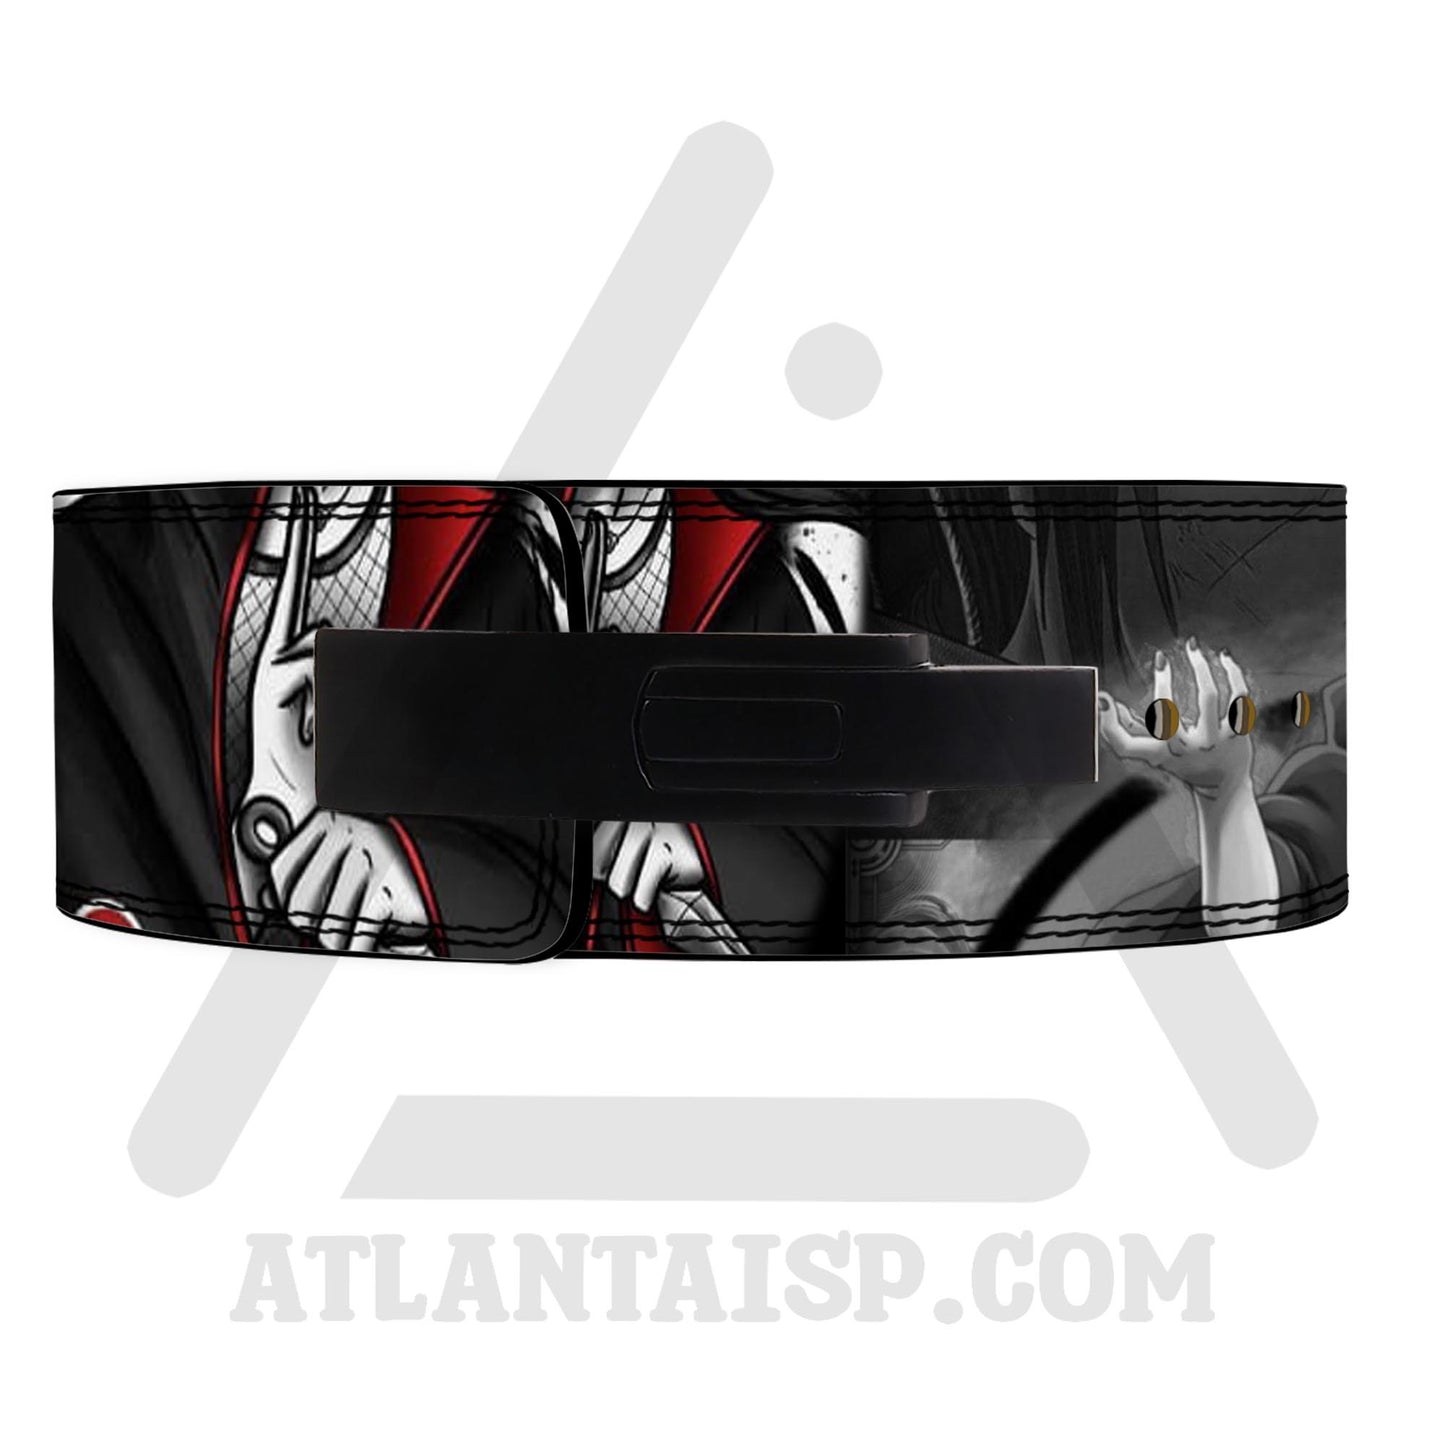 Naruto Anime Weightlifting Belt | Naruto Lever Lifting belt | Naruto Gym Belt | Powerlifting belt | Naruto lever belt | Deadlifting Belt